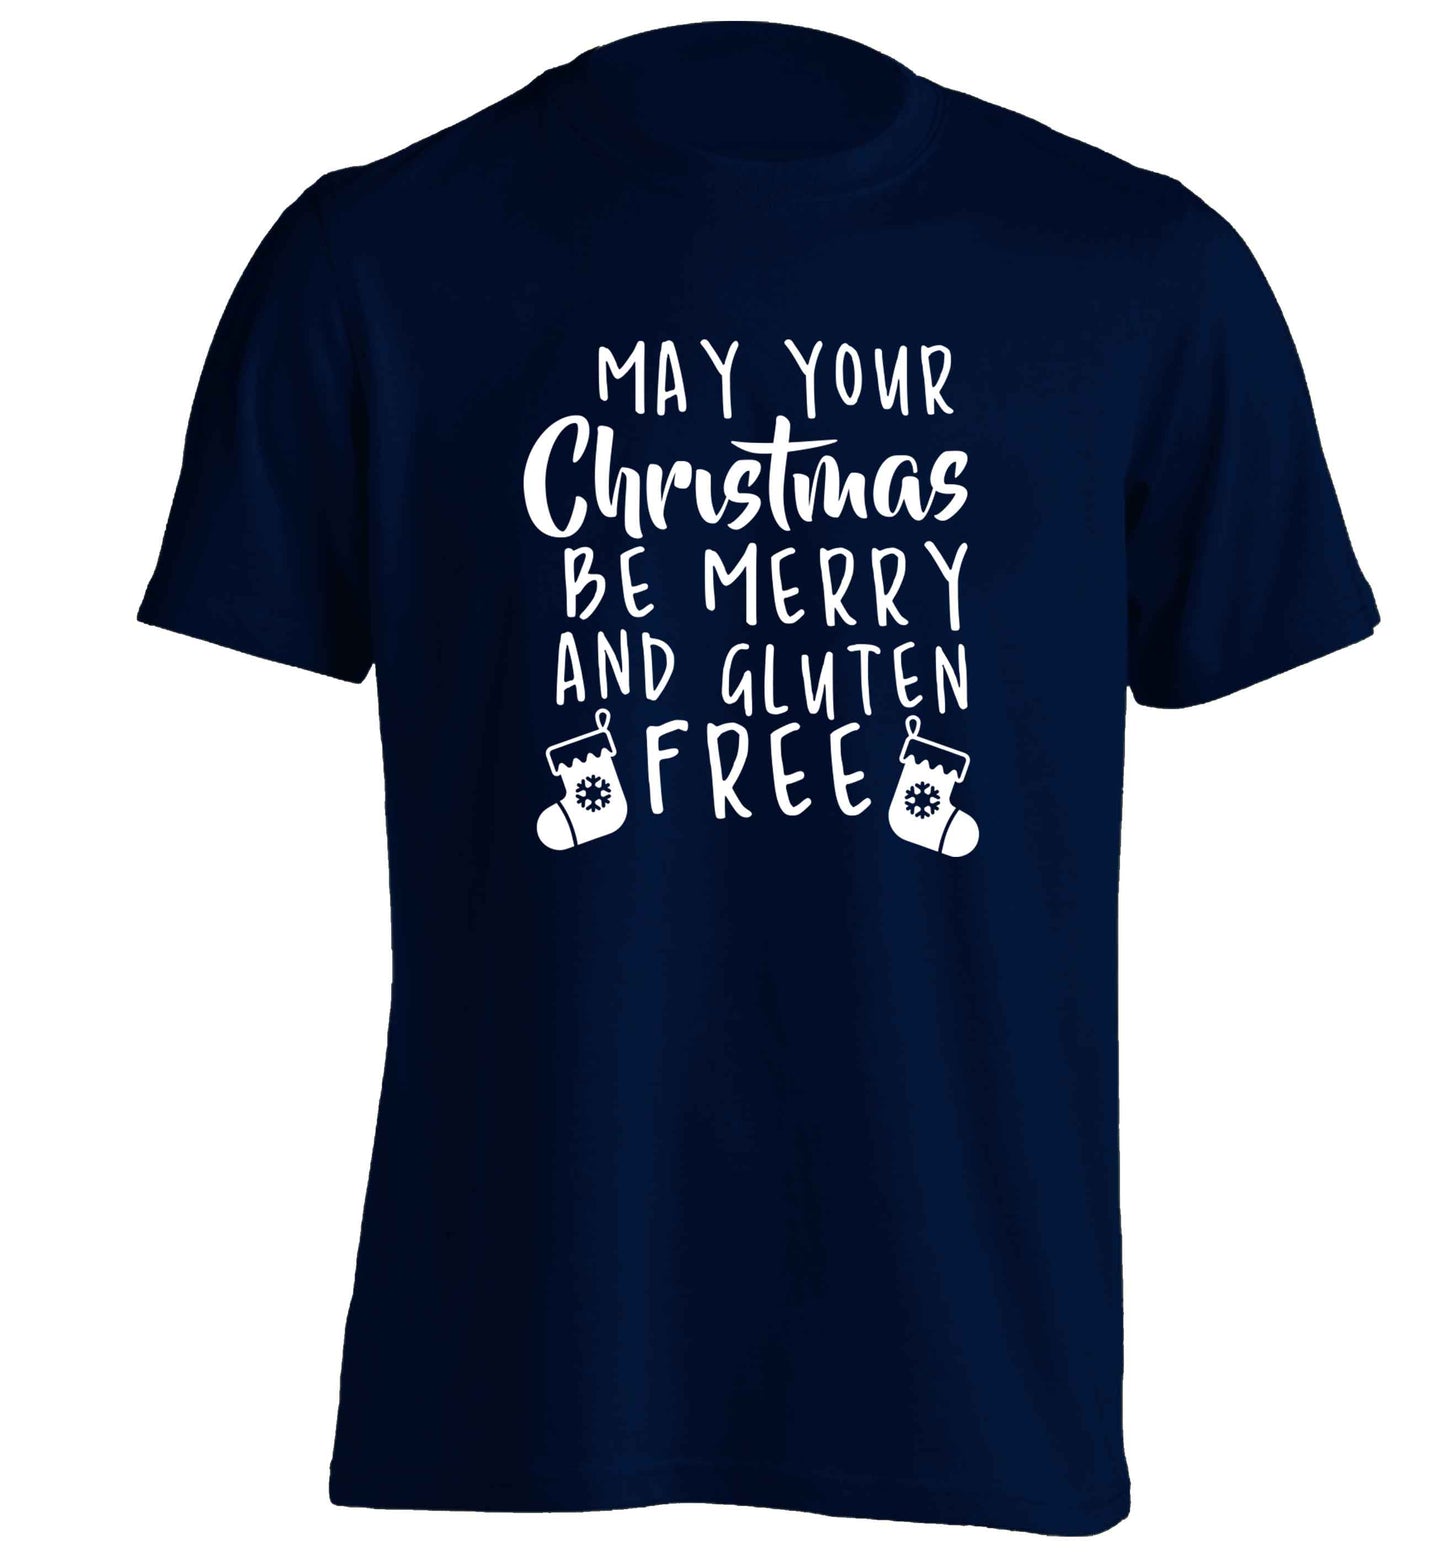 May your Christmas be merry and gluten free adults unisex navy Tshirt 2XL